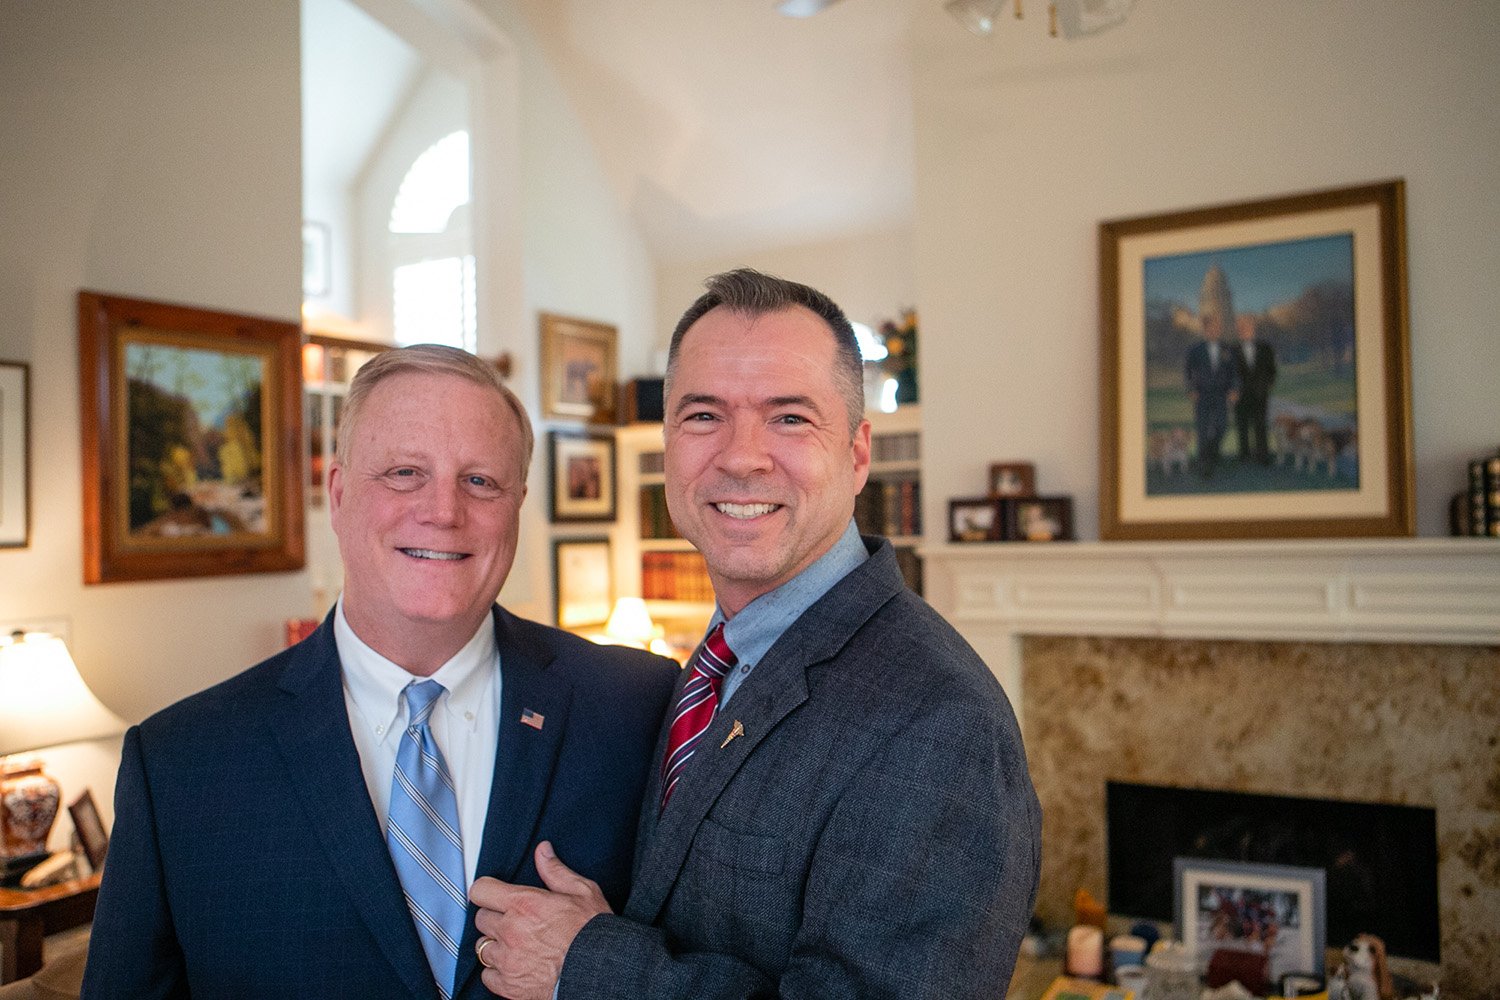 Mark Phariss and Vic Holmes in their Plano home on June 30, 2018.